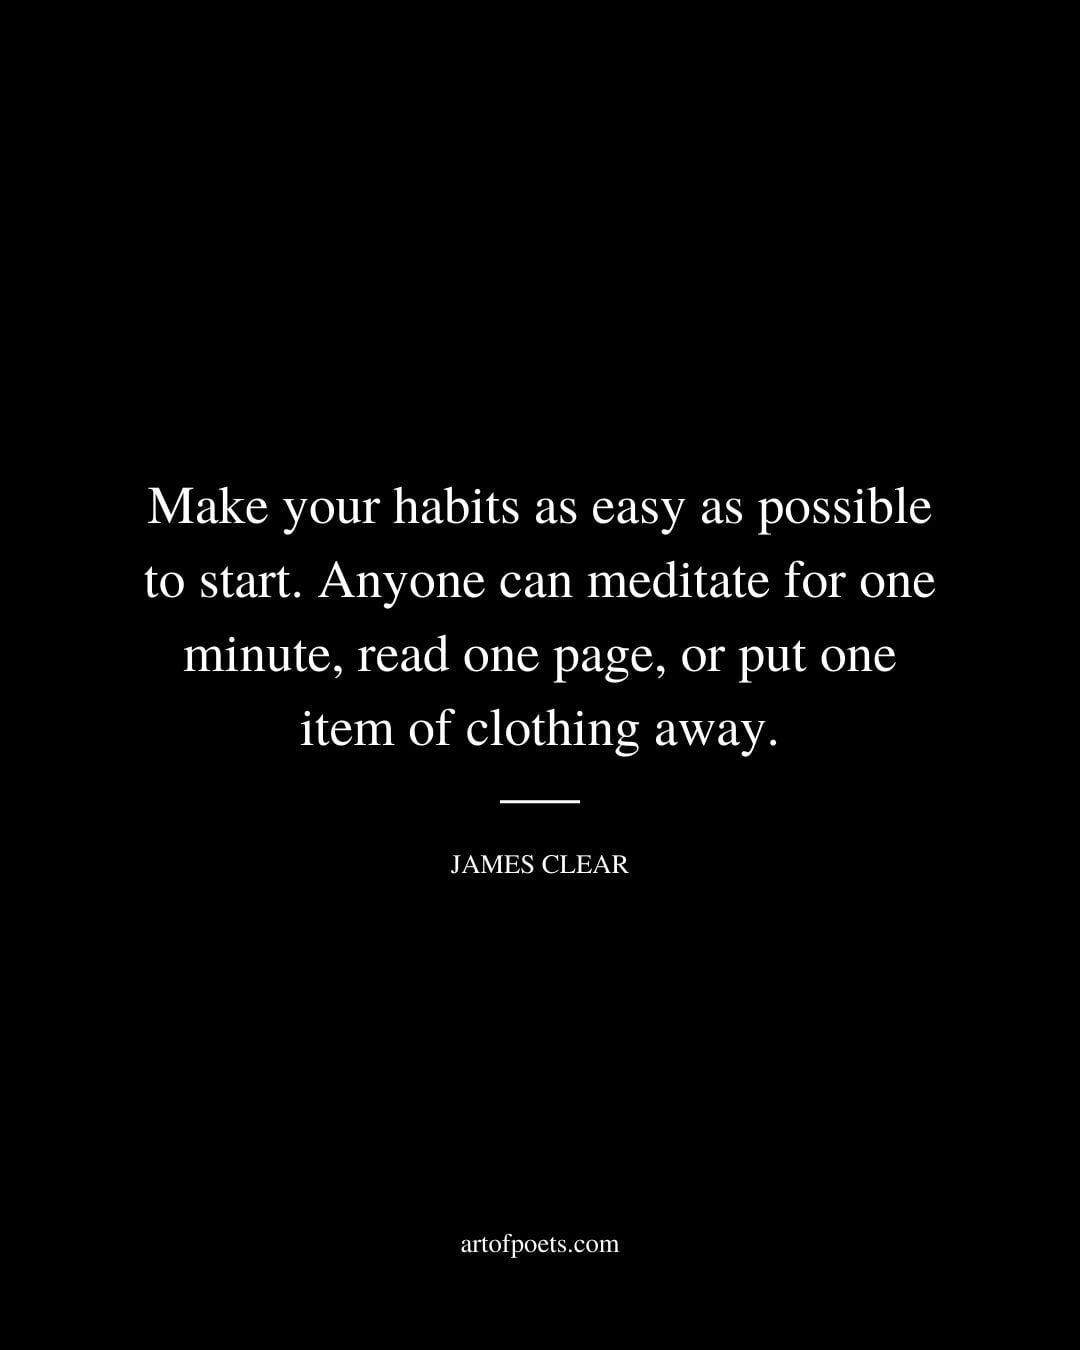 Make your habits as easy as possible to start. Anyone can meditate for one minute read one page or put one item of clothing away. James Clear